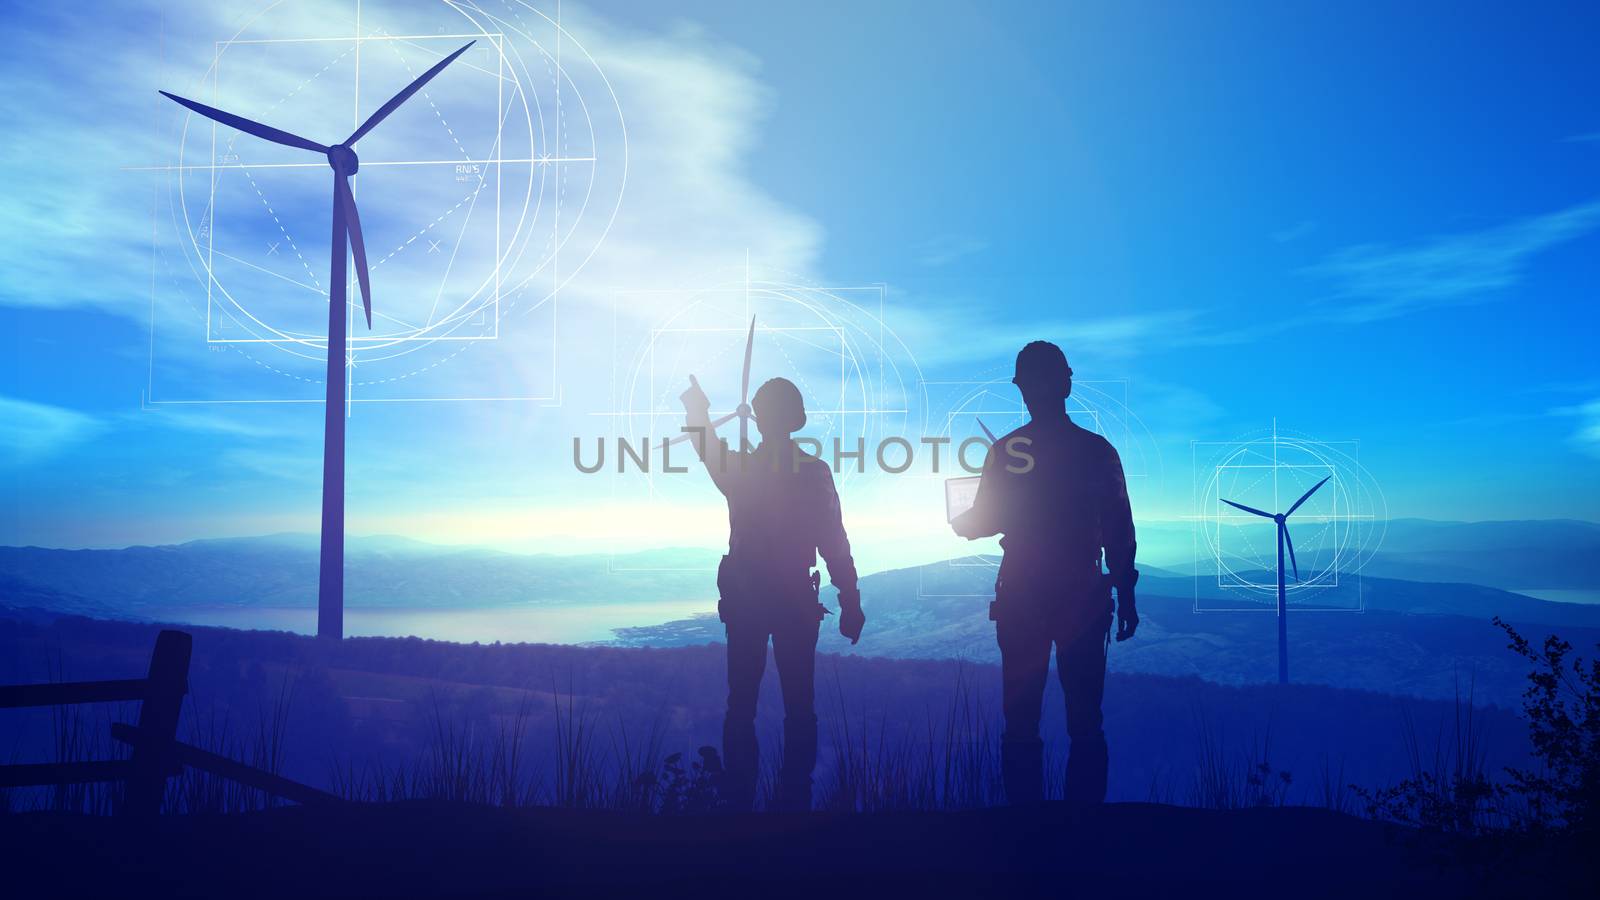 Silhouettes of engineers against the backdrop of dawn and wind farms, while infographics are visible in augmented reality.